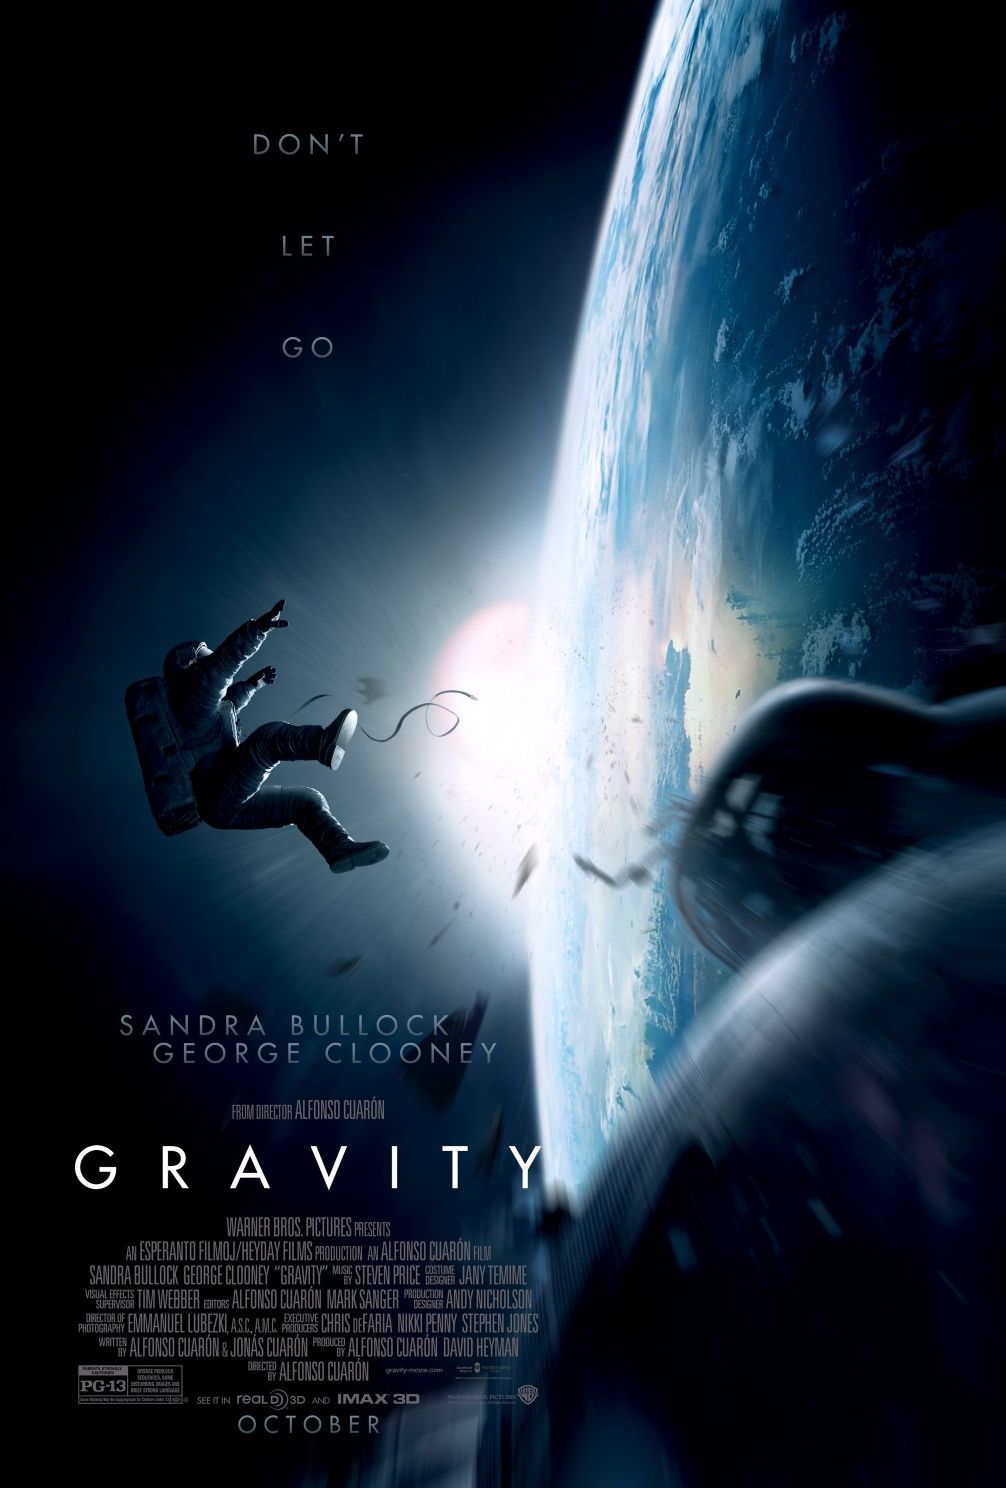 Best Posters Of 2013: Gravity